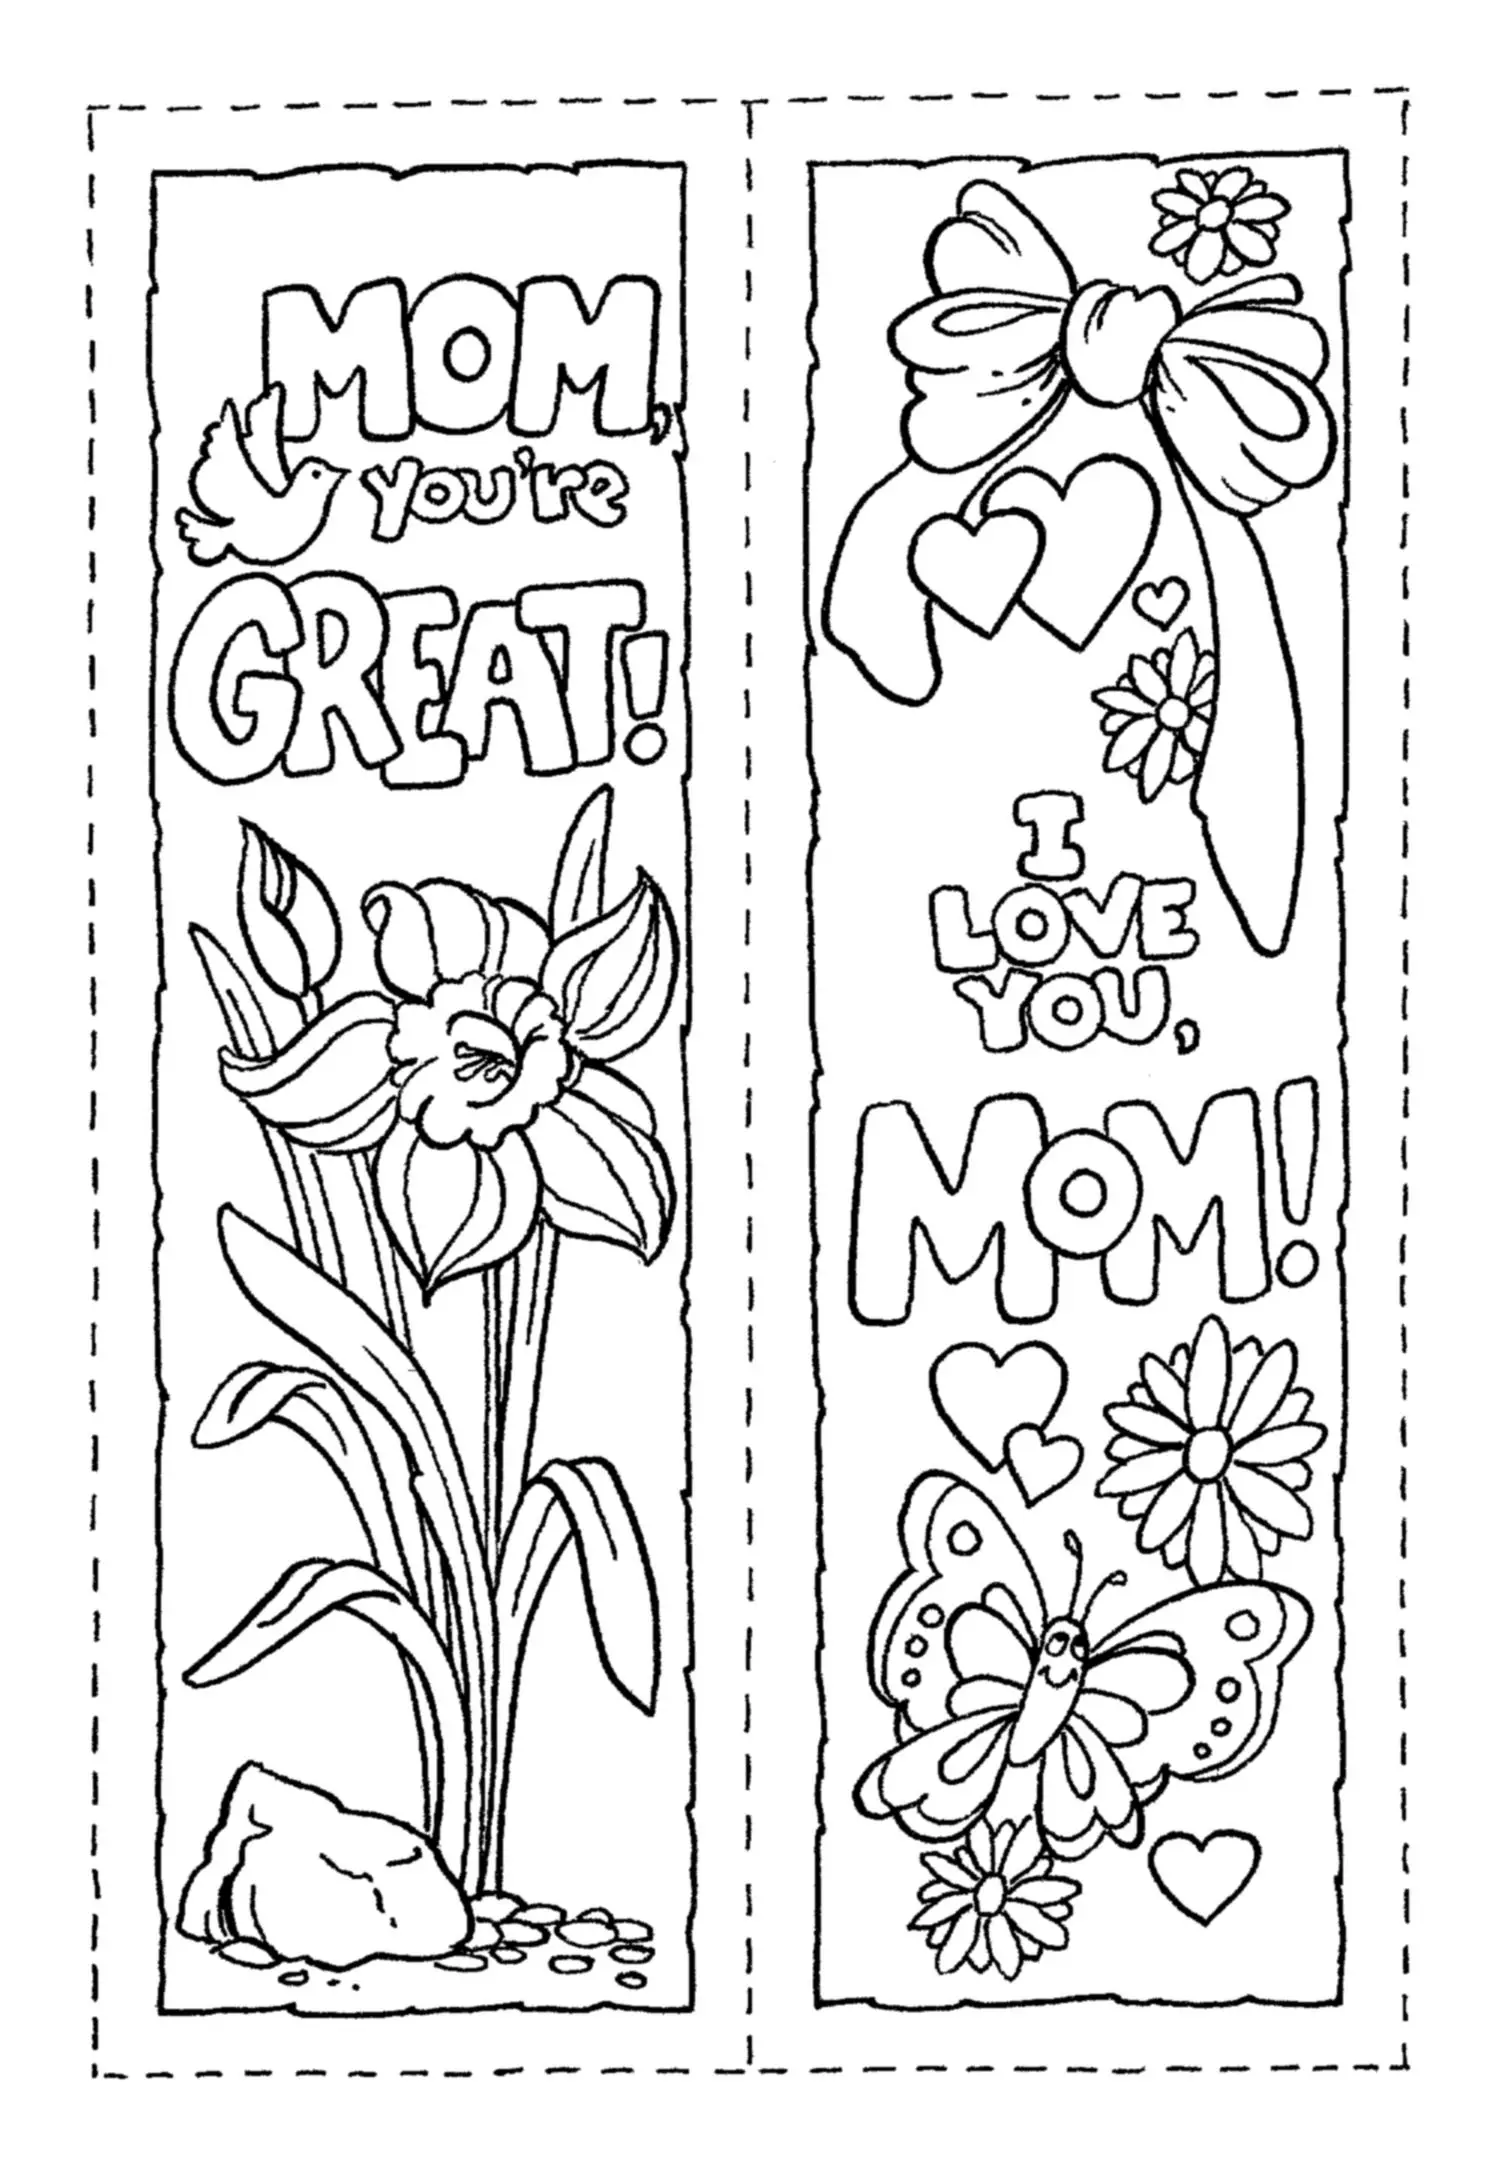 65-fun-blank-bookmarks-to-color-for-you-kitty-baby-love